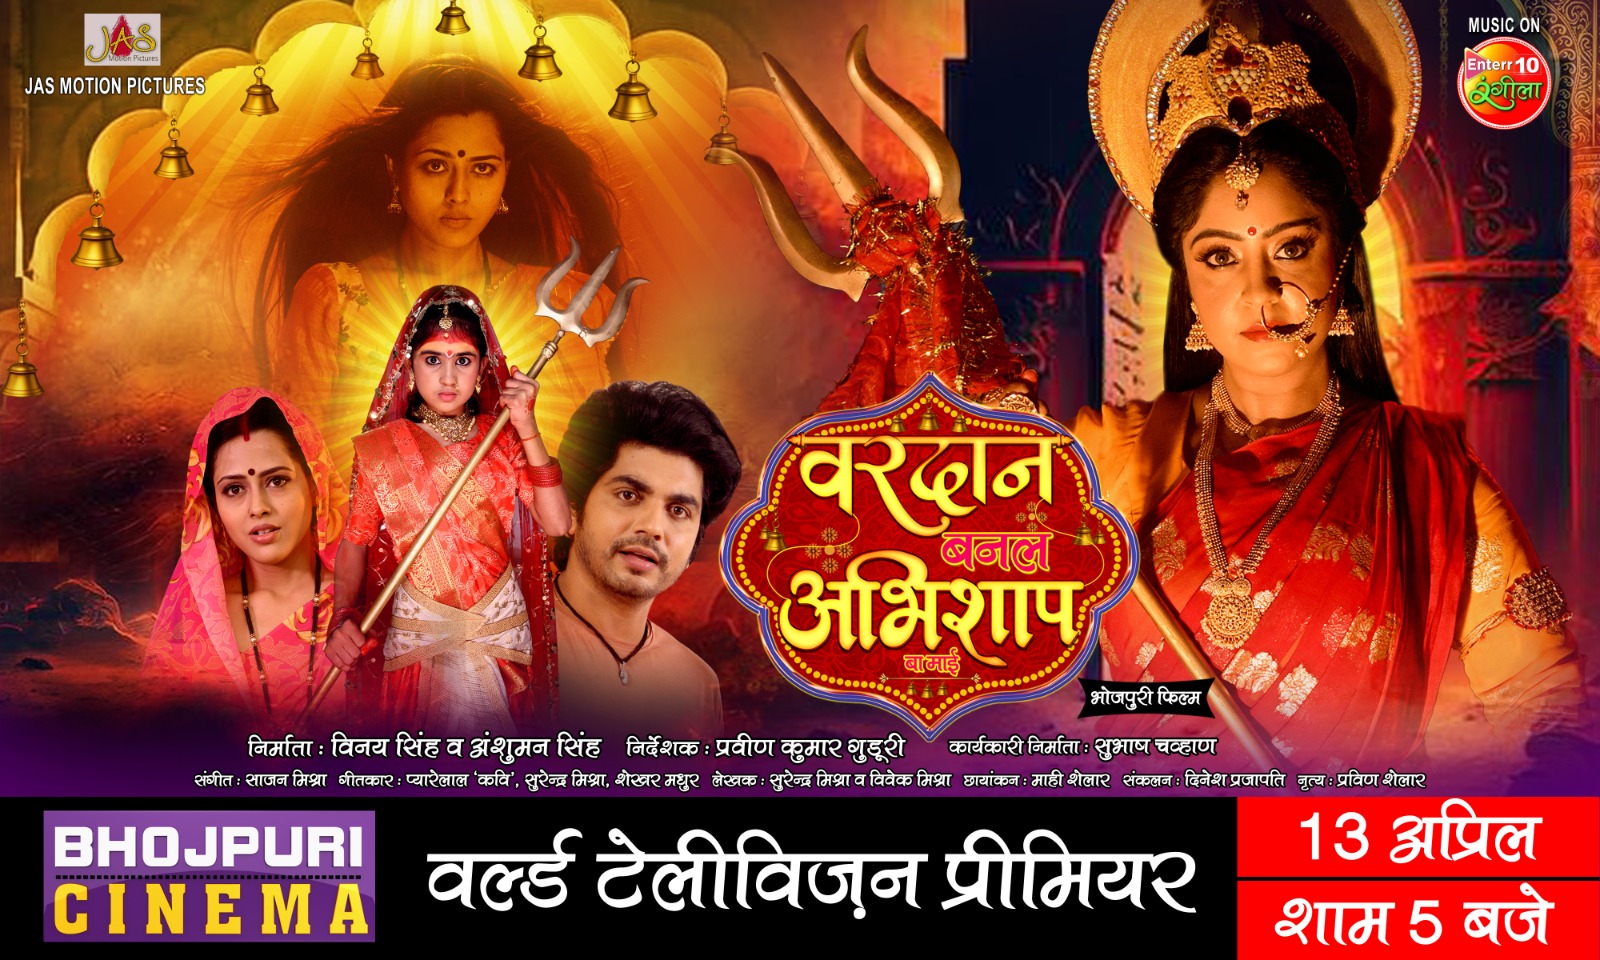 On Navratri, definitely watch this film decorated with devotion to Santoshi Mata.